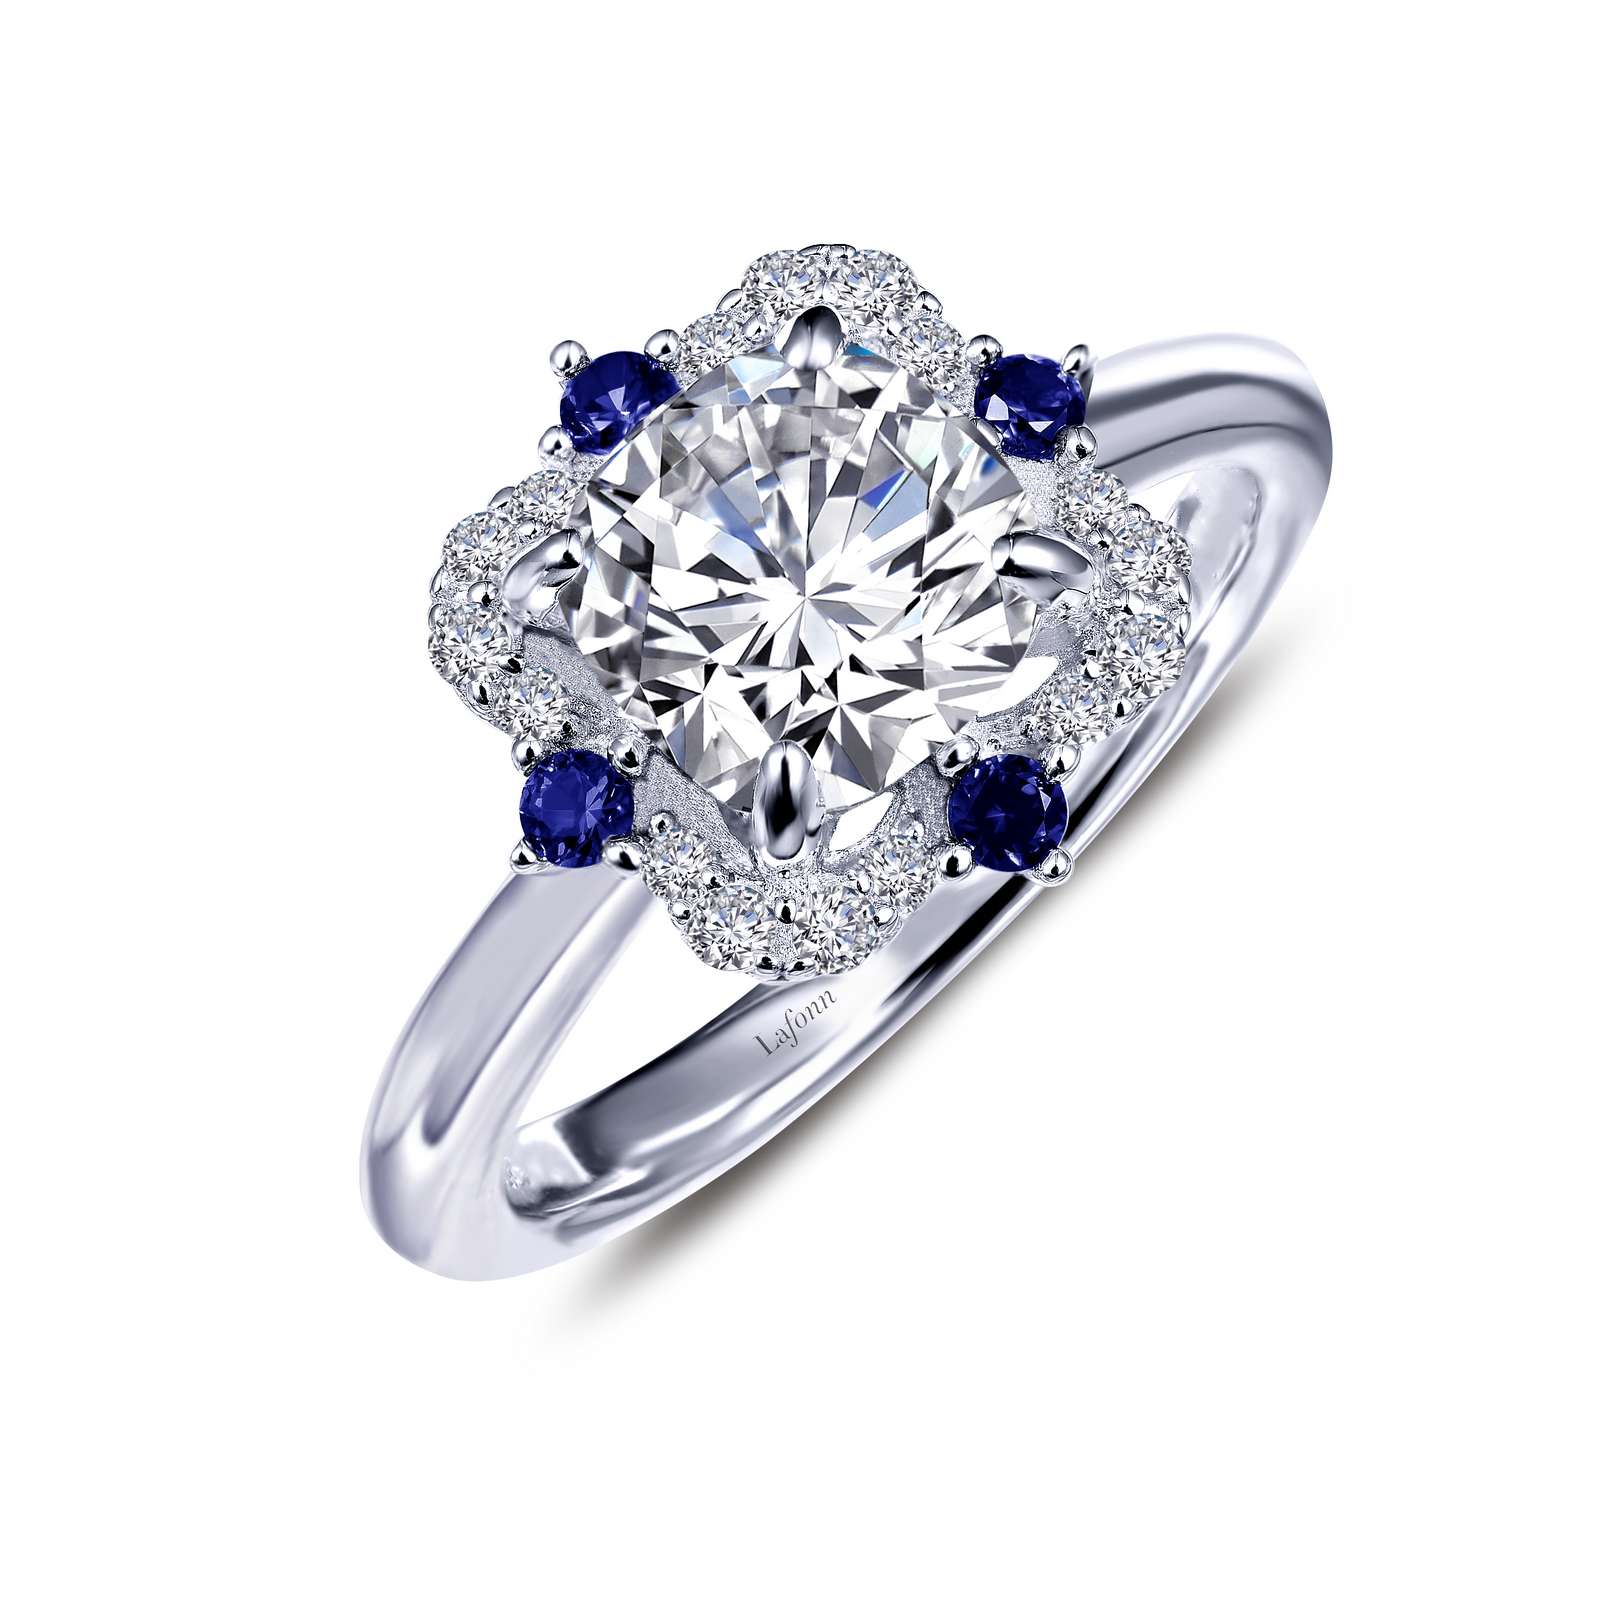 Art Deco Inspired Engagement Ring Jacqueline's Fine Jewelry Morgantown, WV